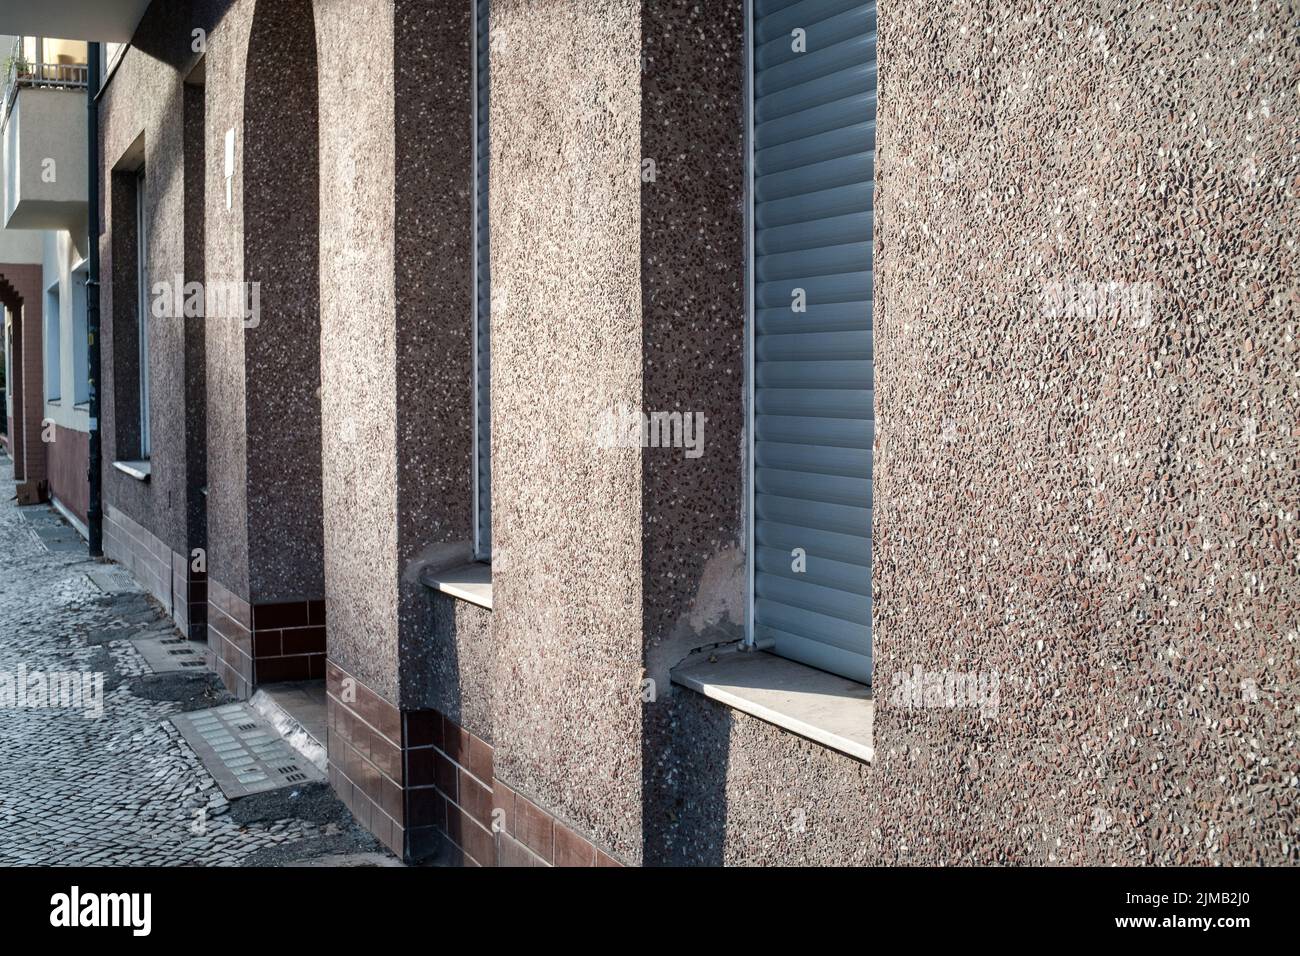 Clean walls and shuttered doors and windows on a sunny afternoon in the Neukölln area of Berlin, Germany. Stock Photo